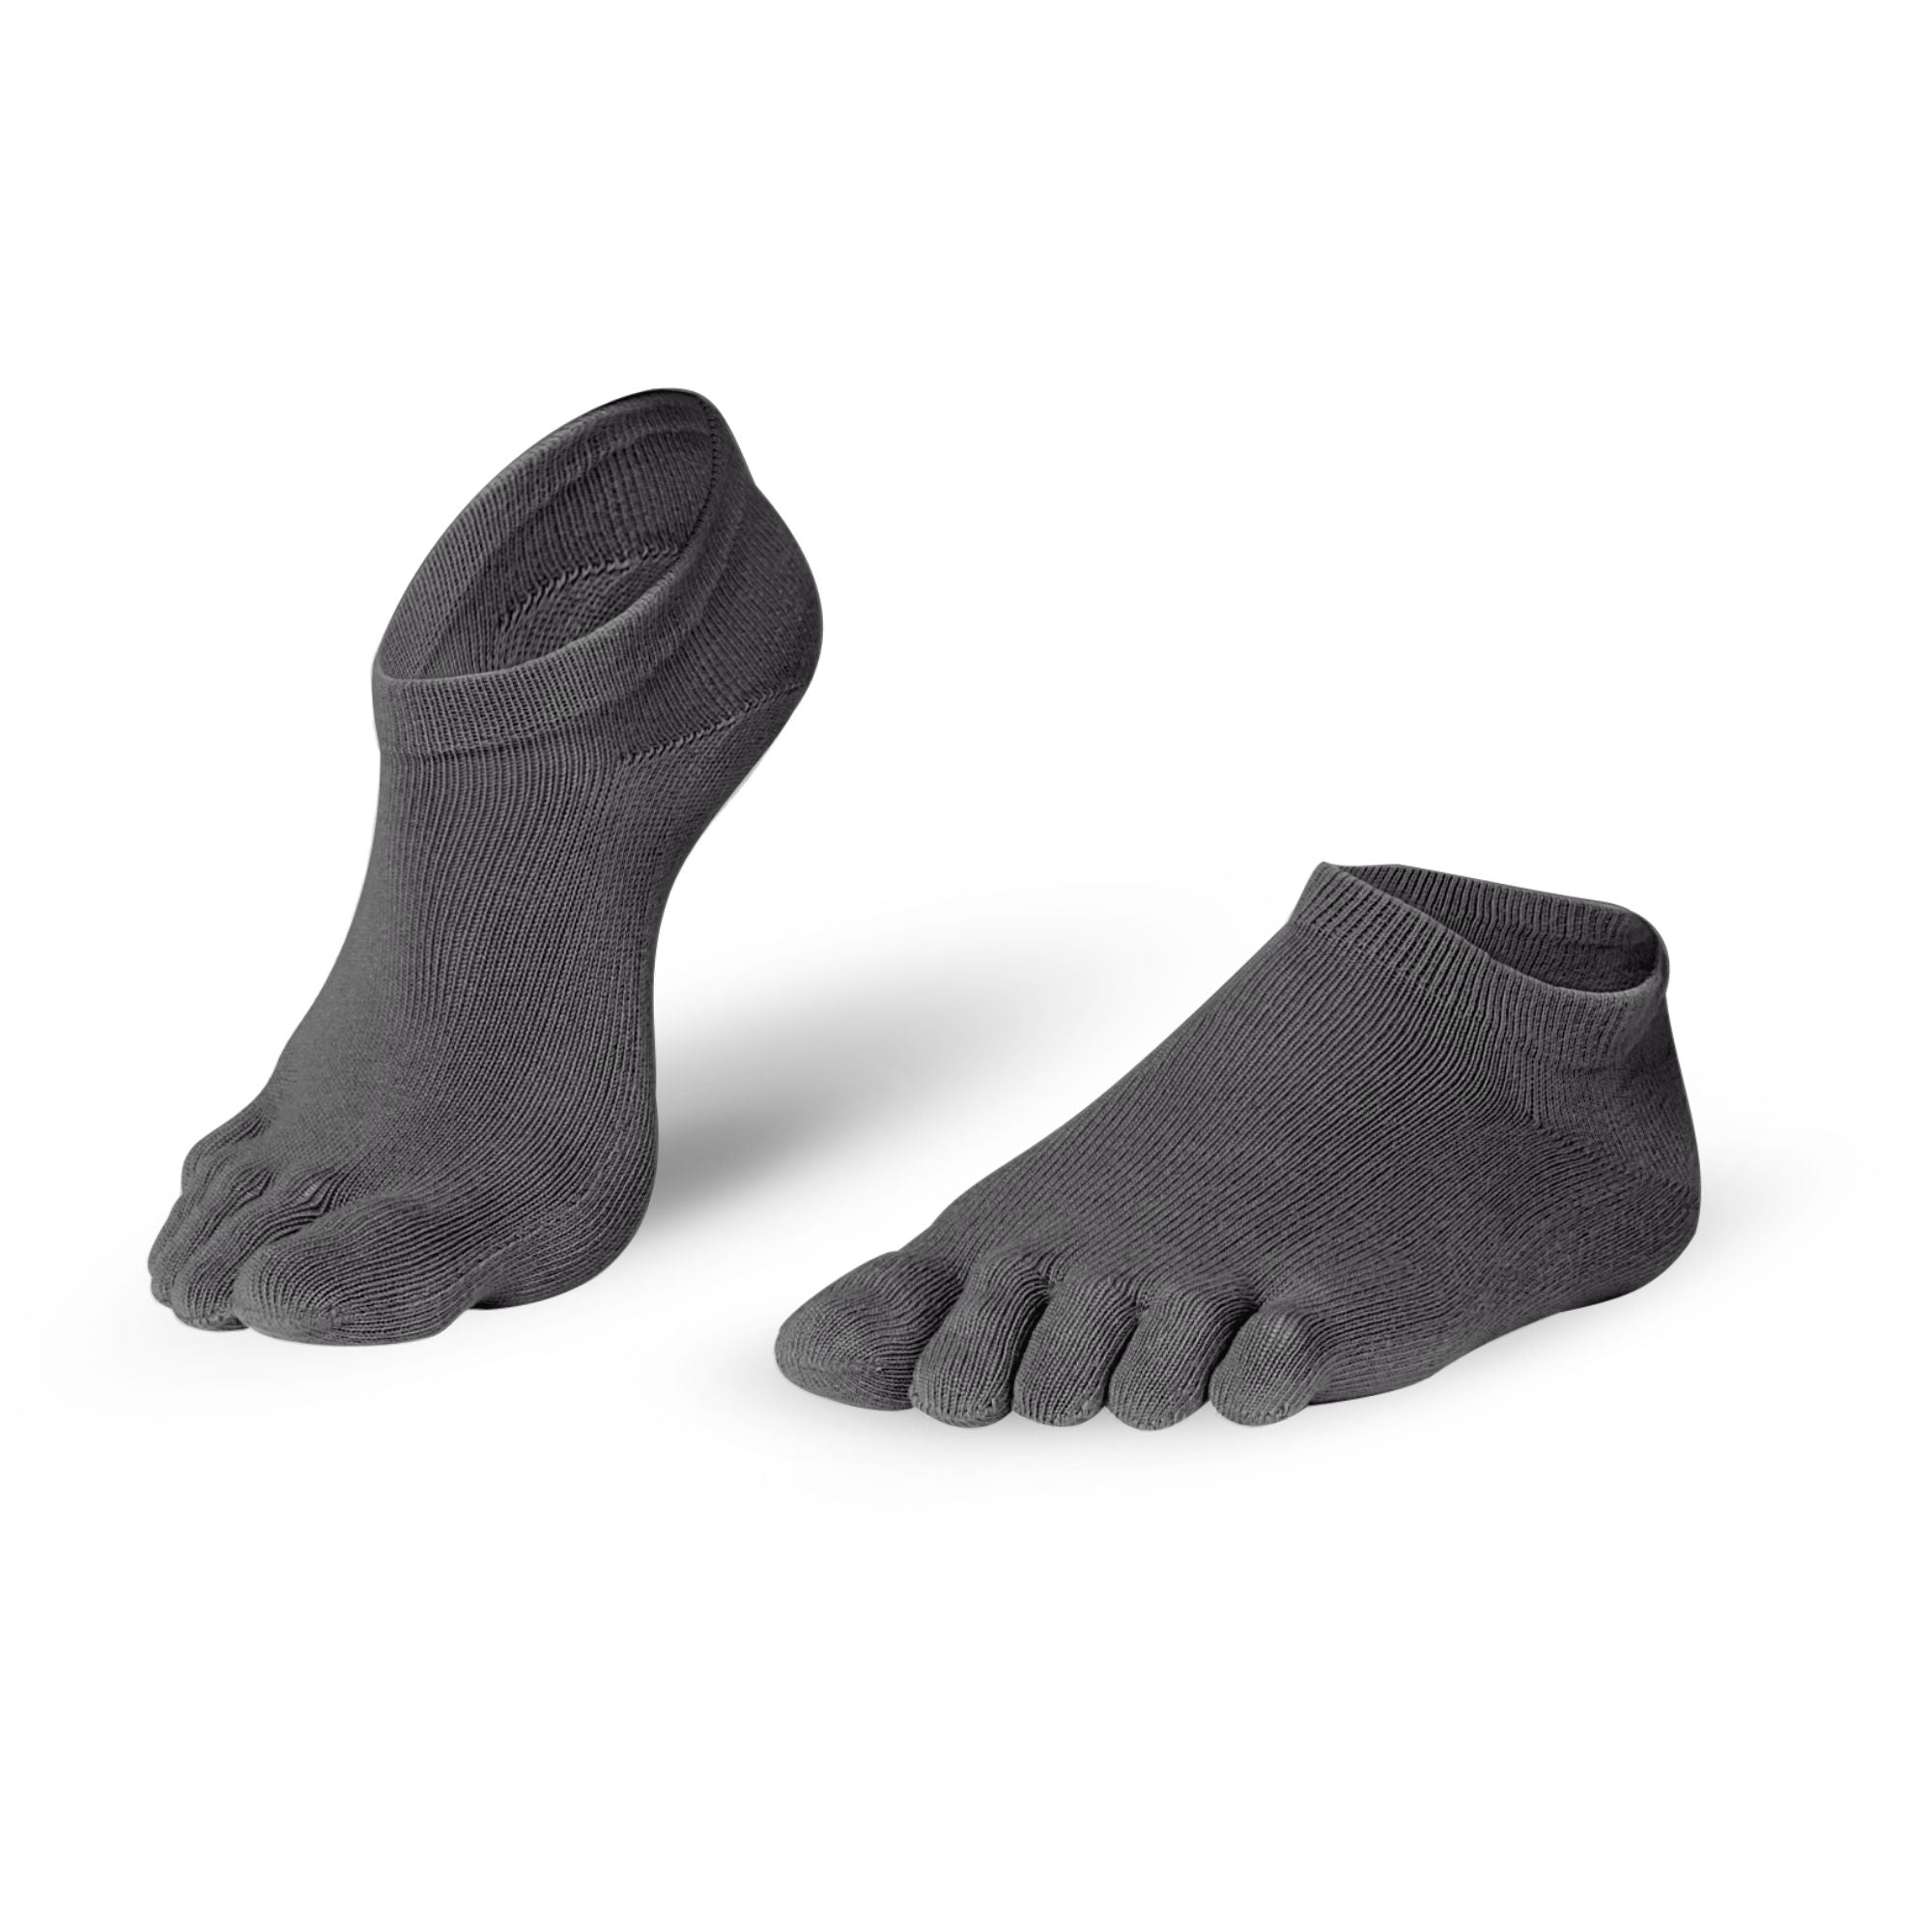 Knitido Everyday Essentials Sneaker toe socks from cotton for everyday life in many colors